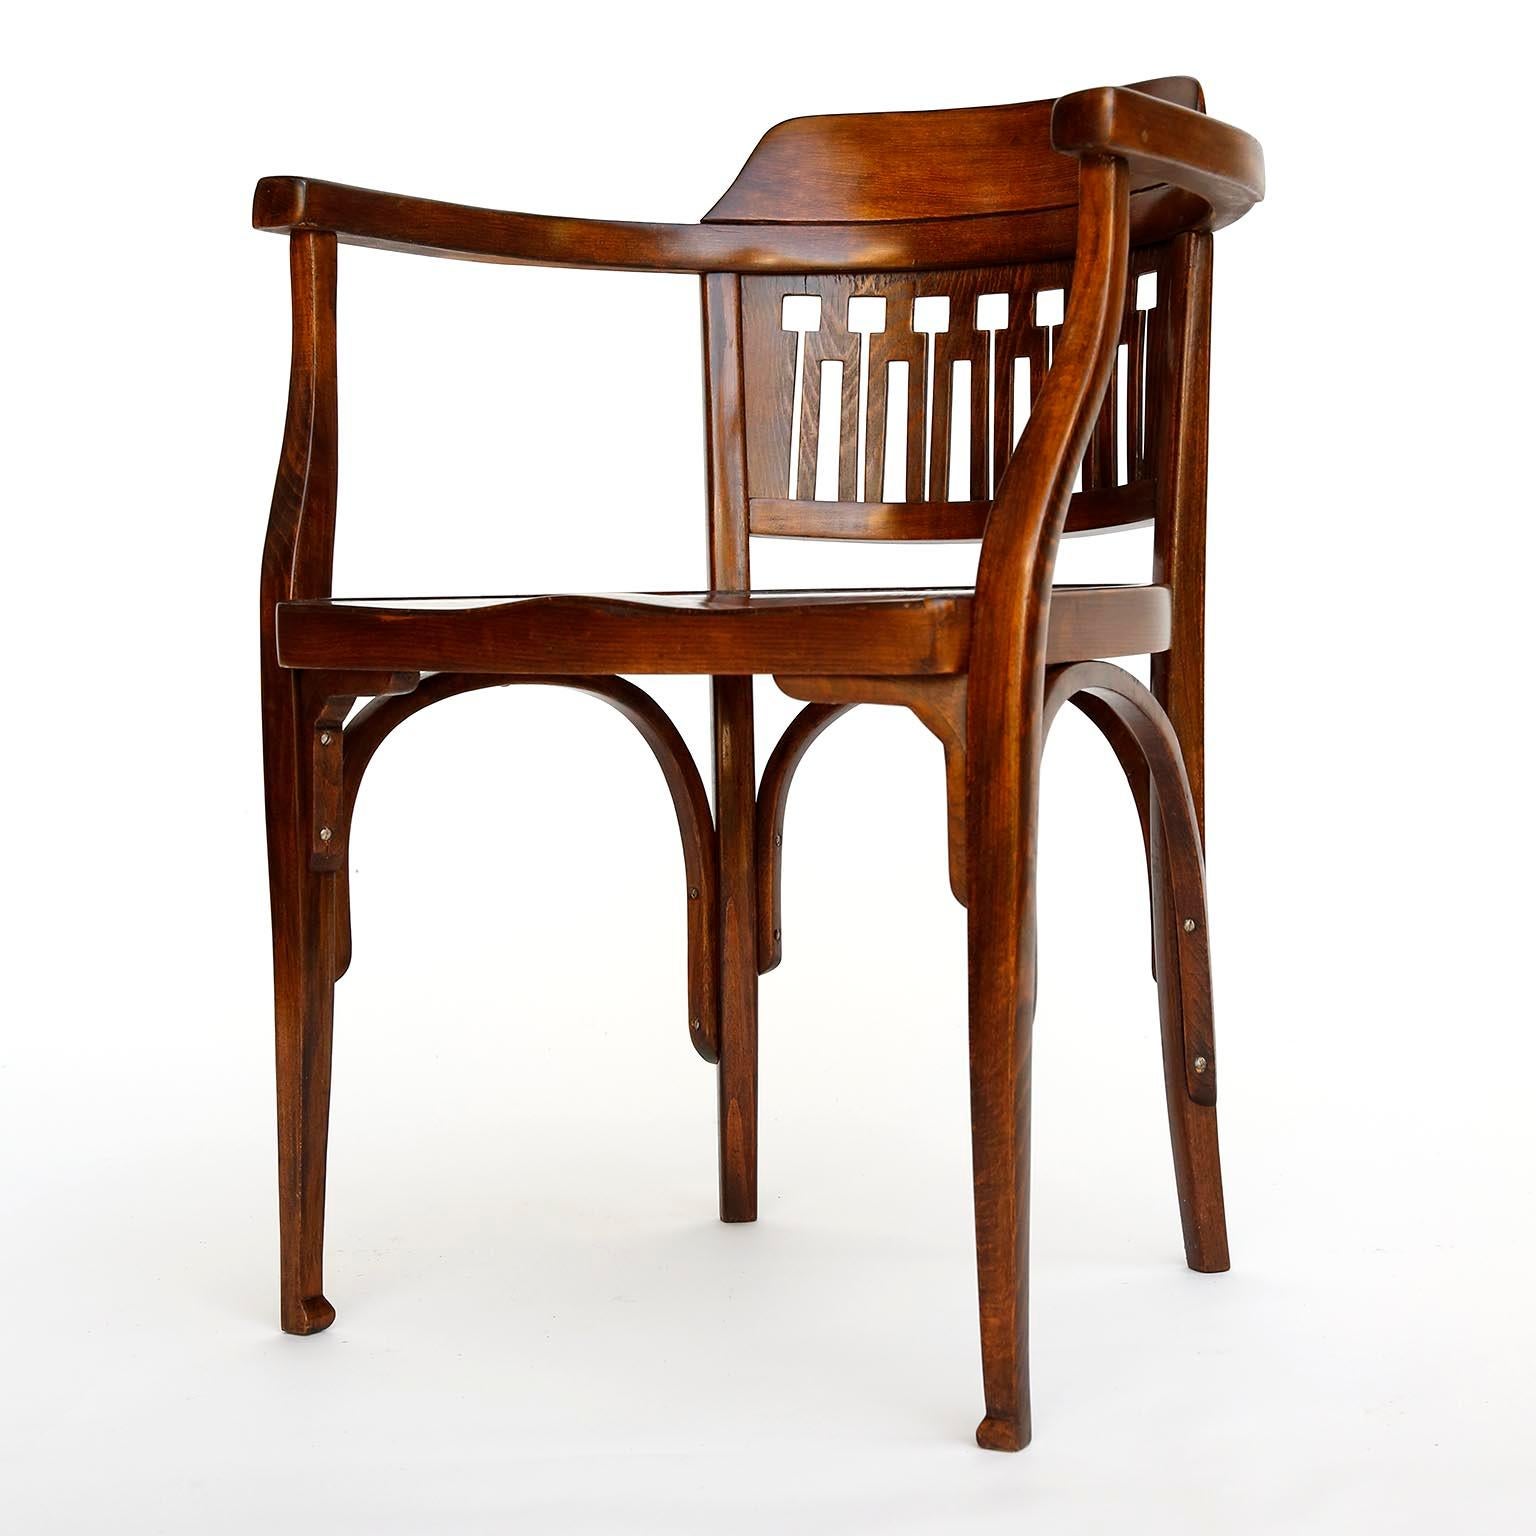 Early 20th Century Pair of Otto Wagner Chairs Armchairs by J.&J. Kohn, Austria, Vienna Secession